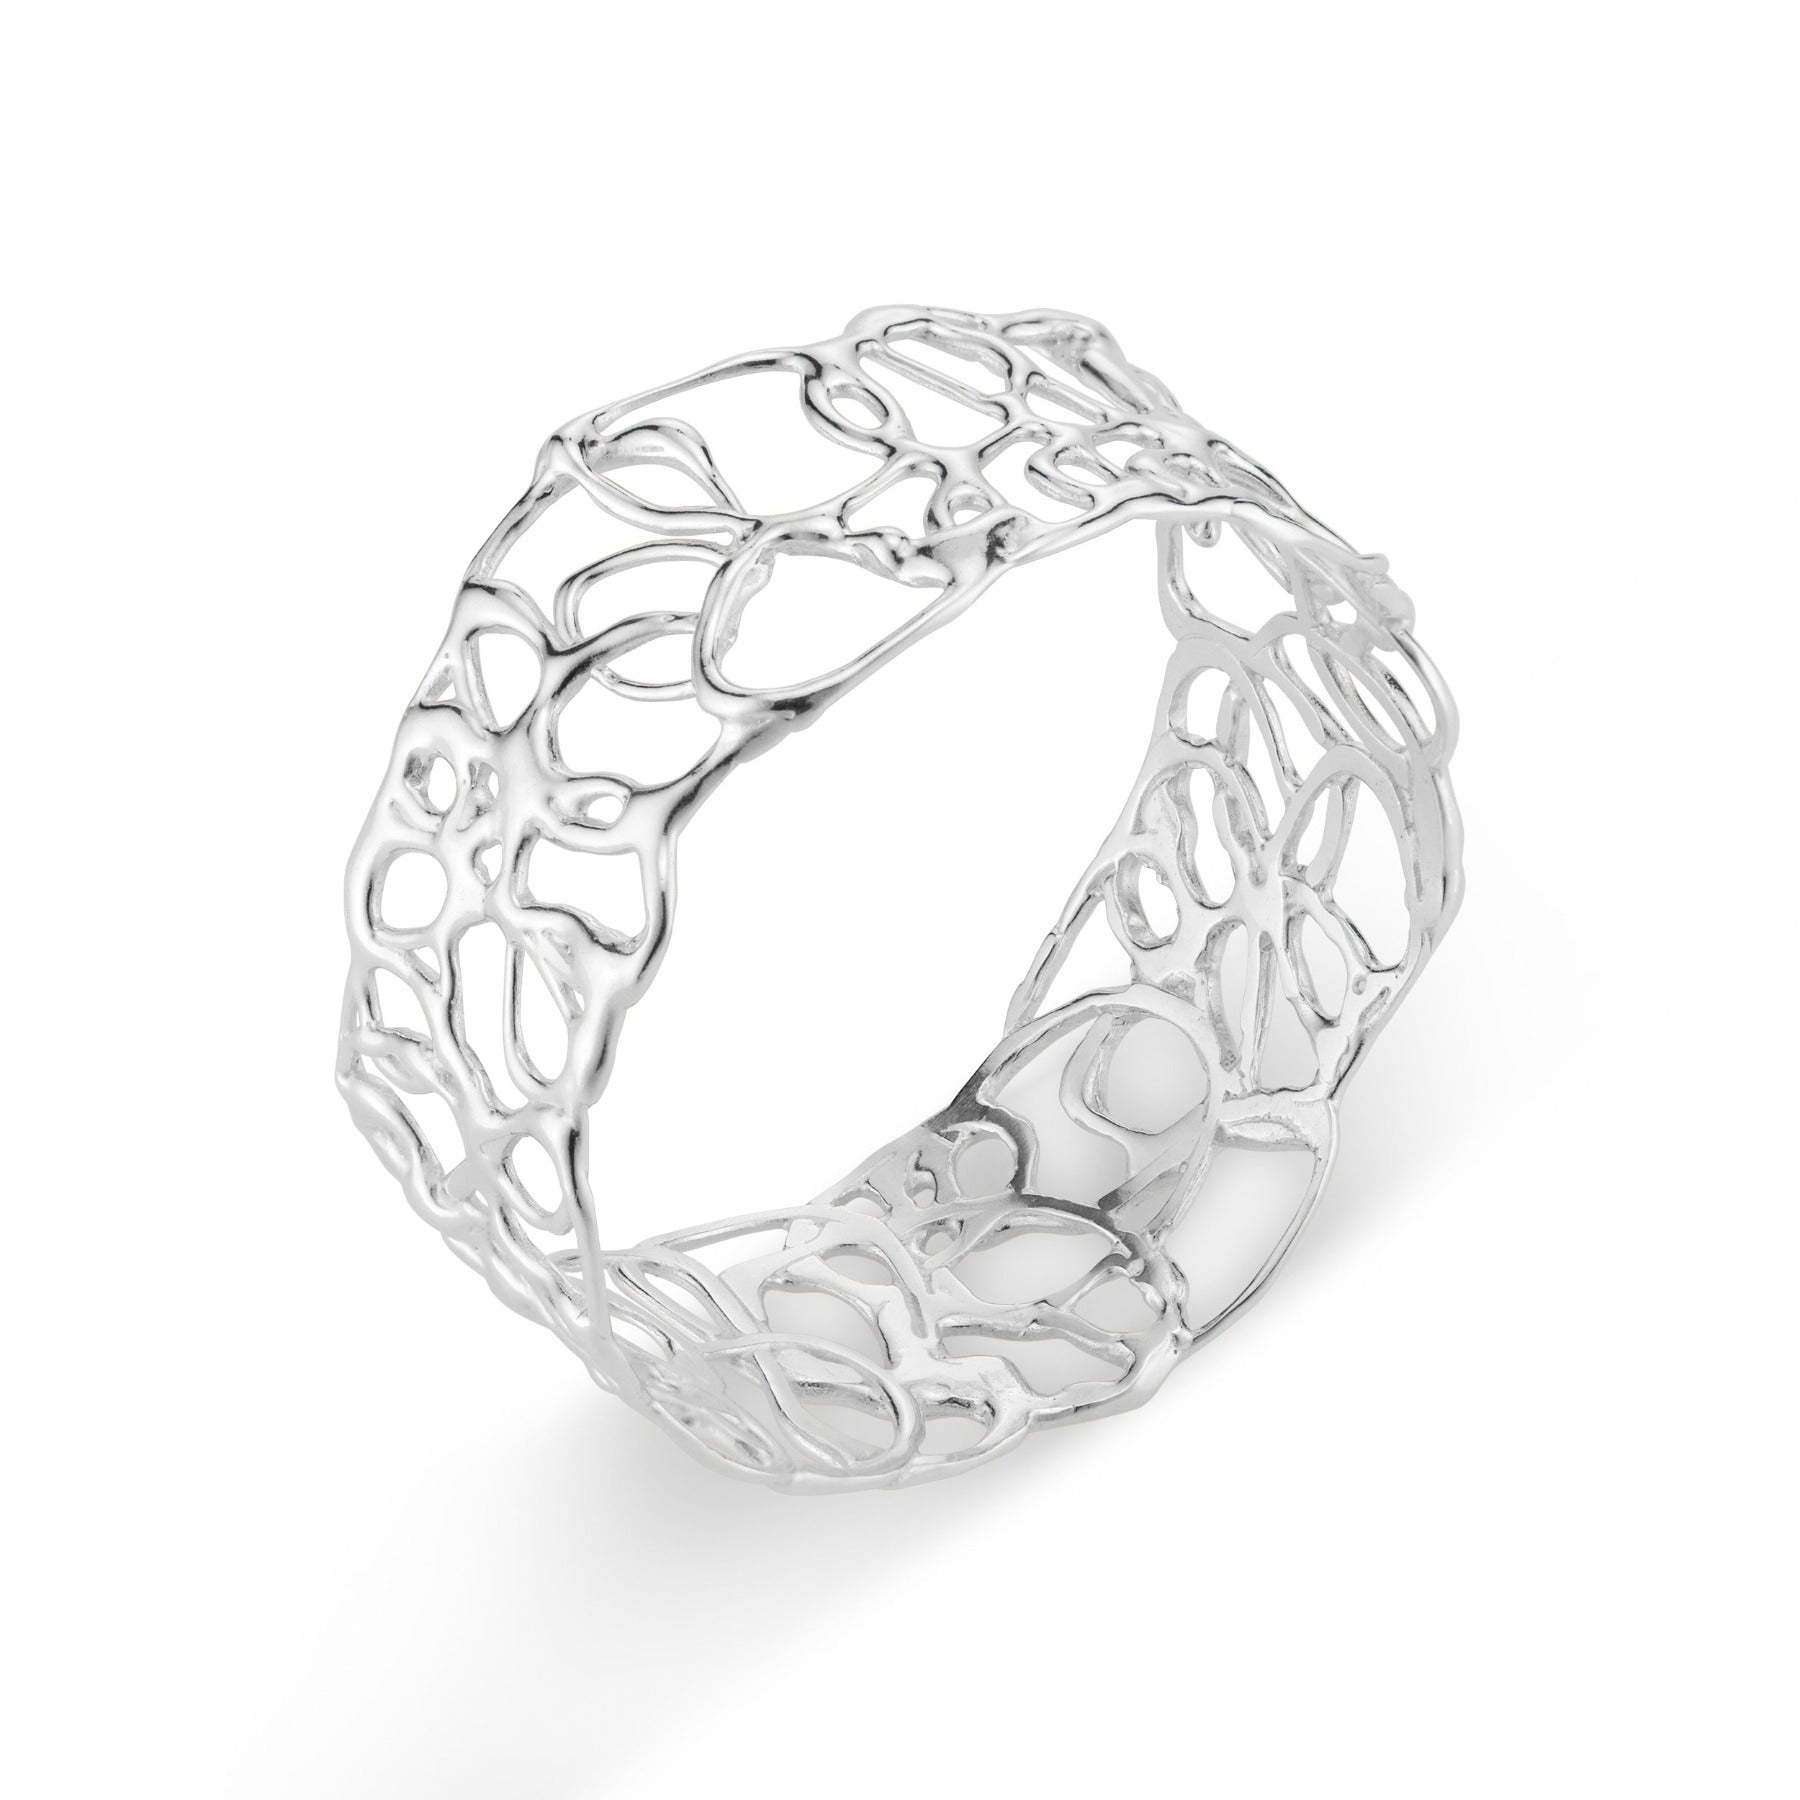 Abstract, squiggle slip on bangle in sterling silver.